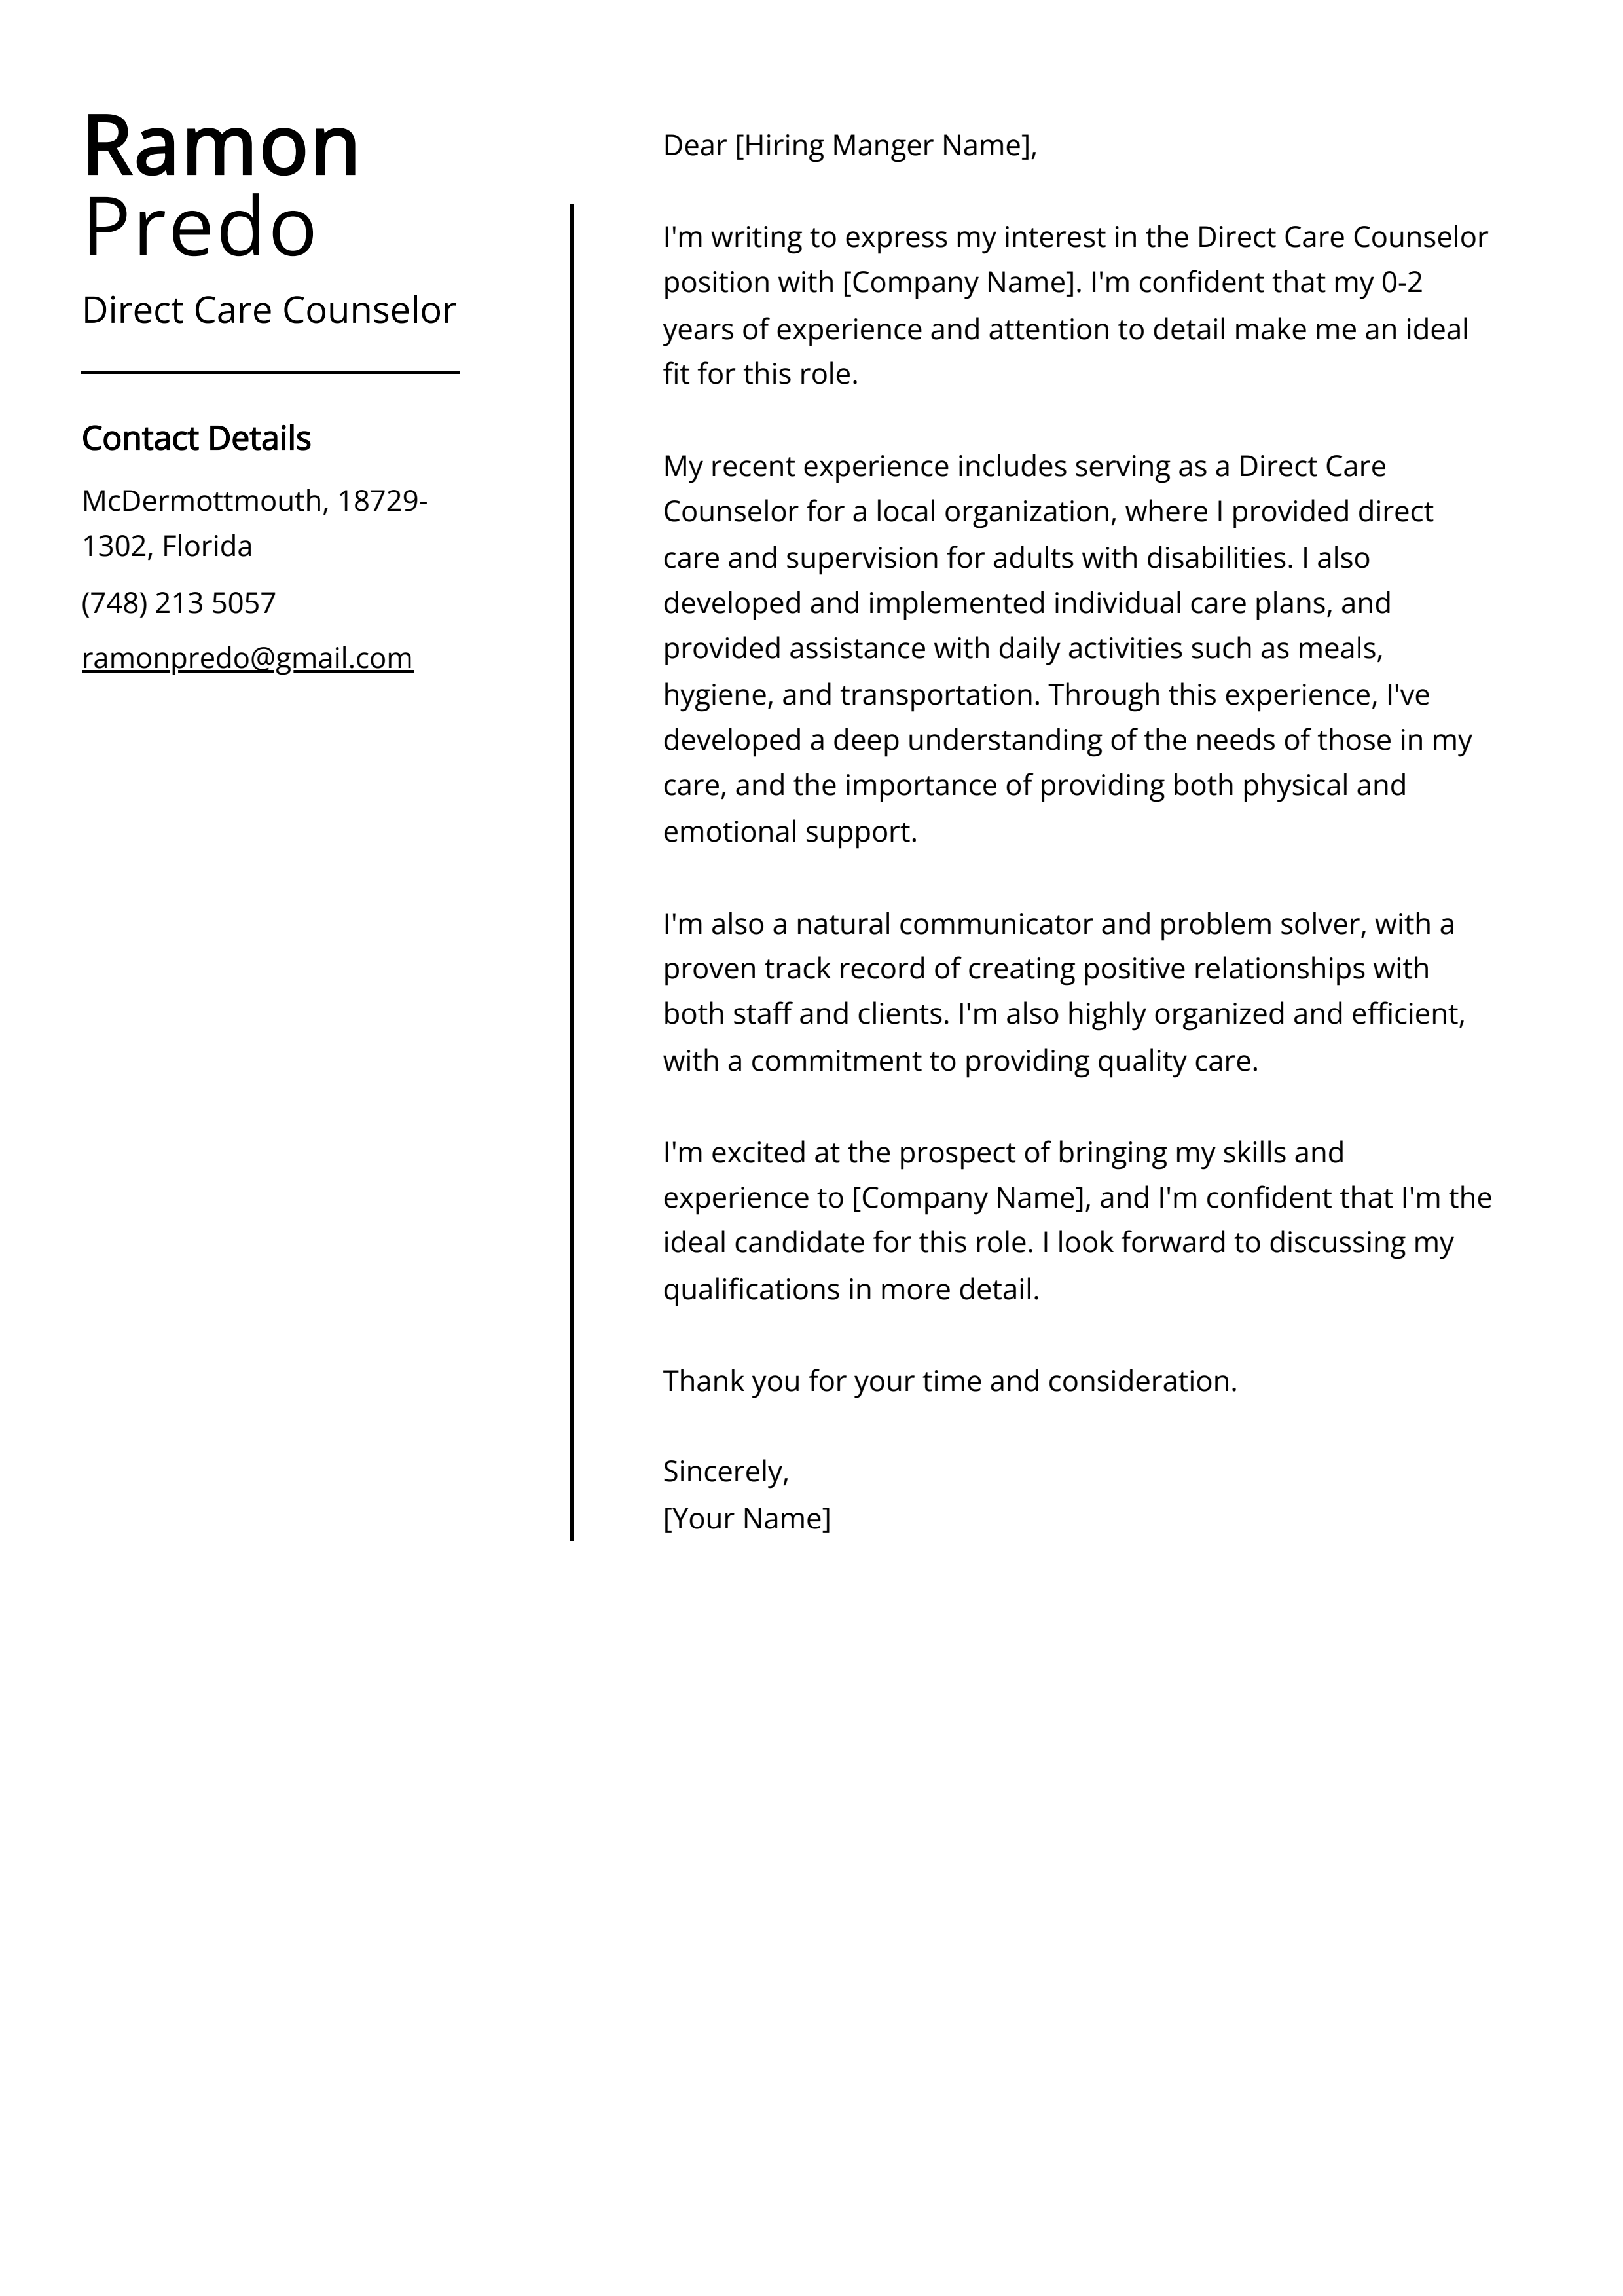 Direct Care Counselor Cover Letter Example